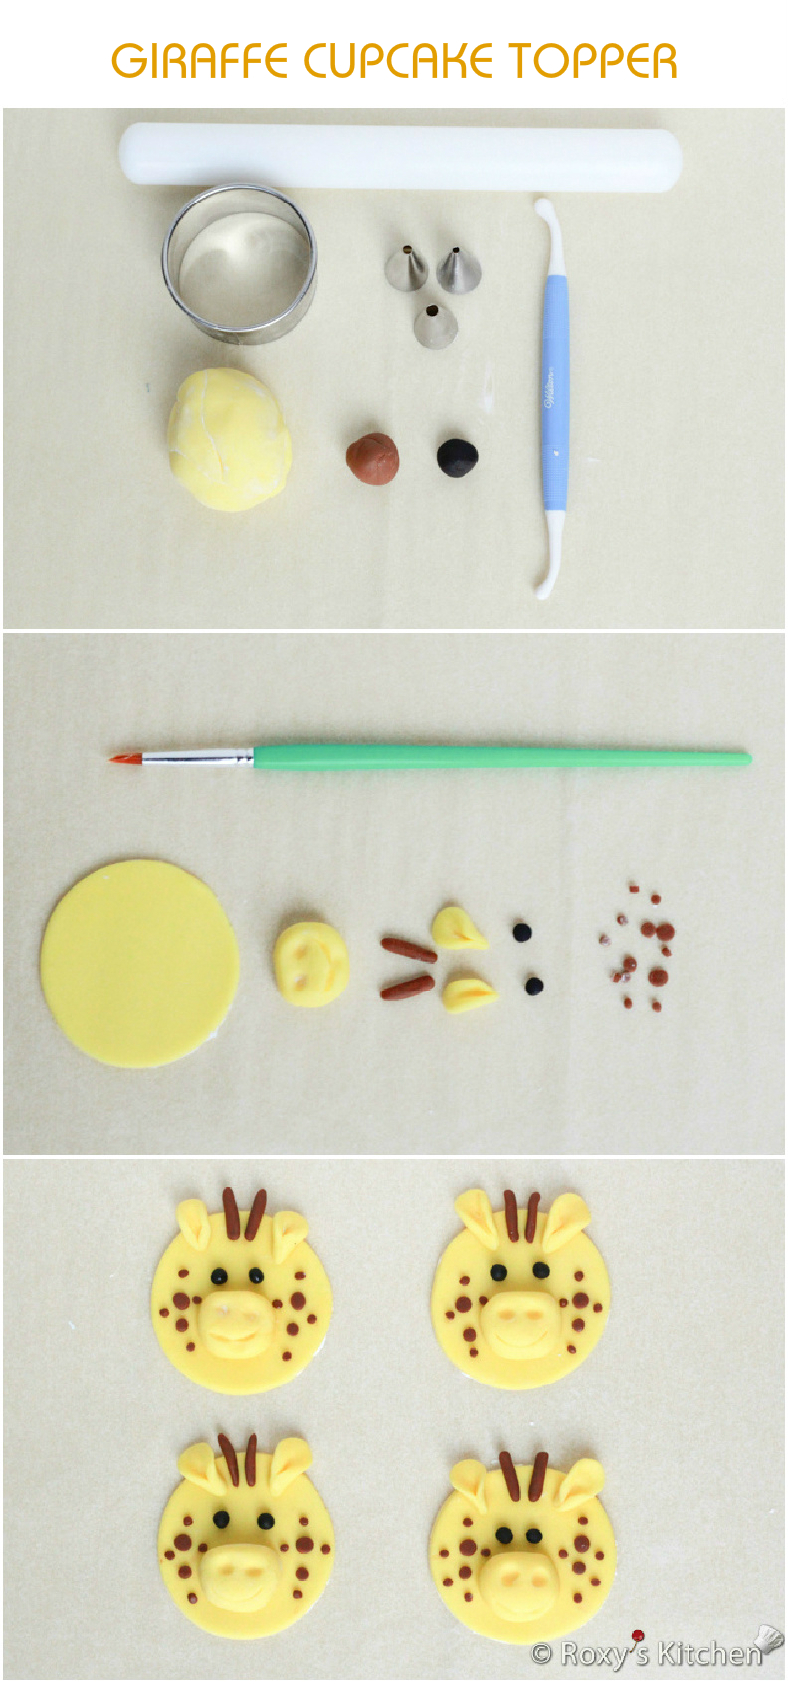 Tutorial with Step by Step Instructions & Photos - How to Make a Fondant Giraffe Cupcake Topper